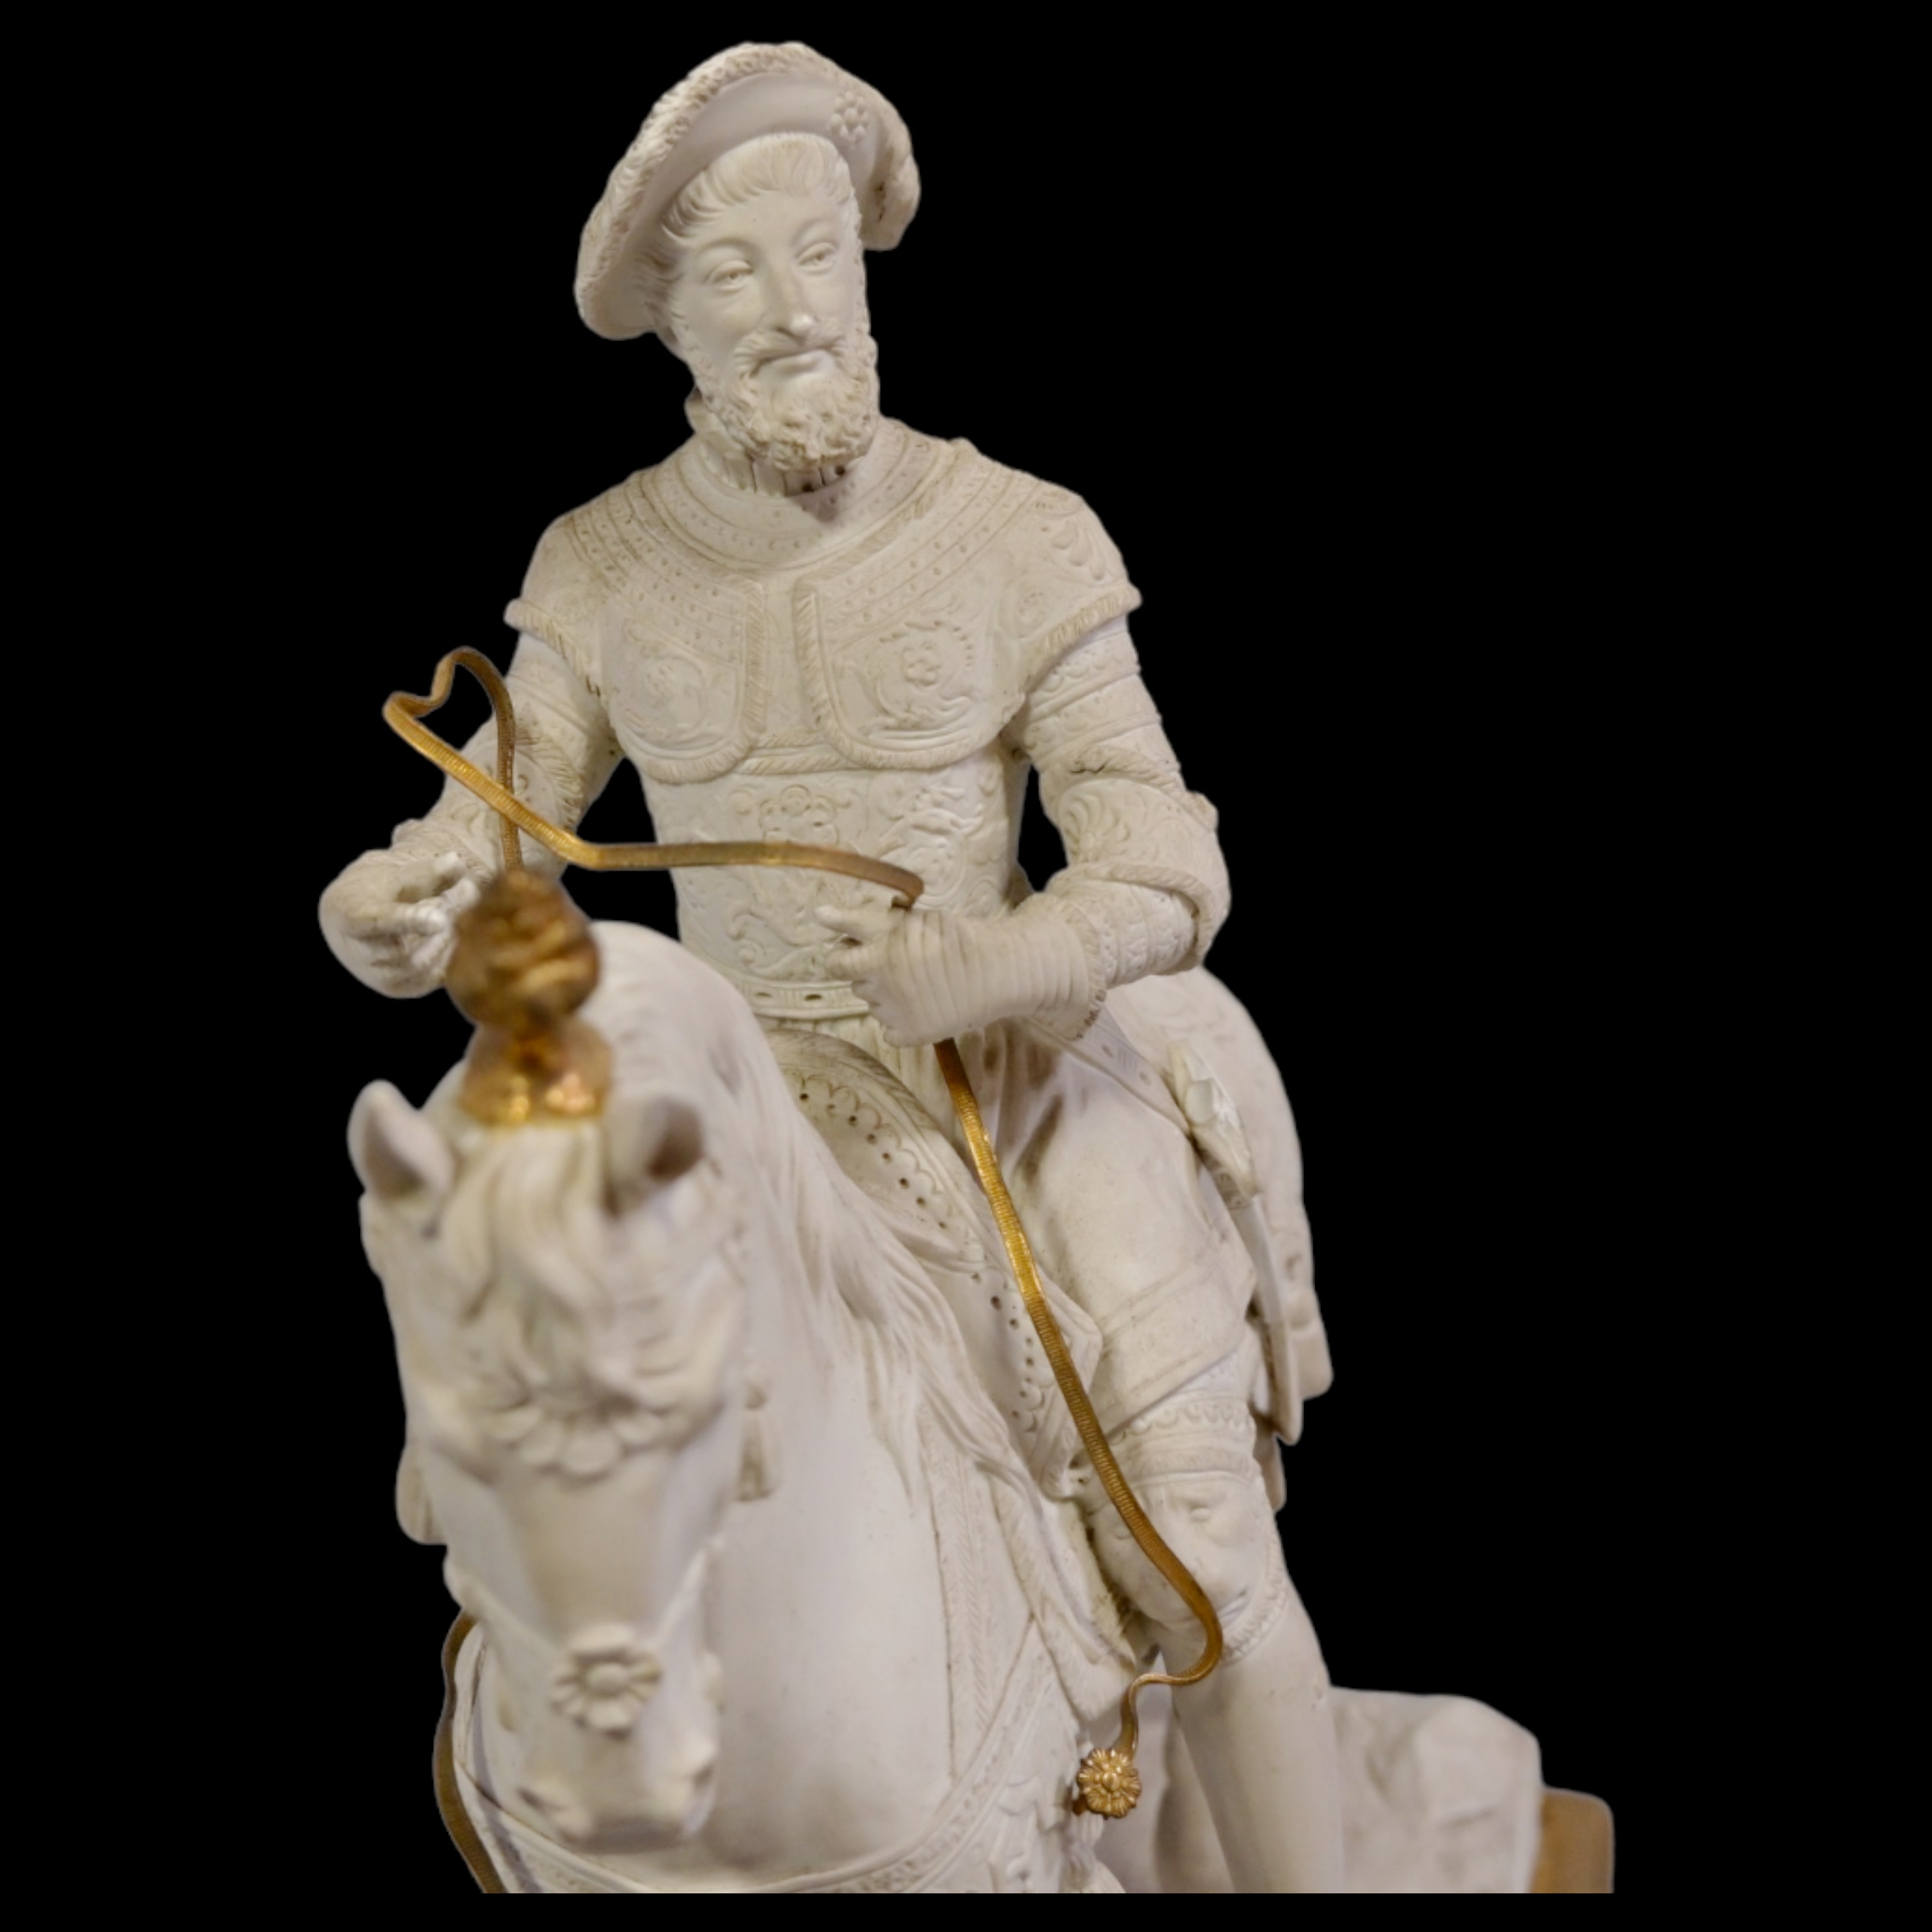 Porcelain (bisquit) equestrian statue of french king Francis I. - Image 5 of 8